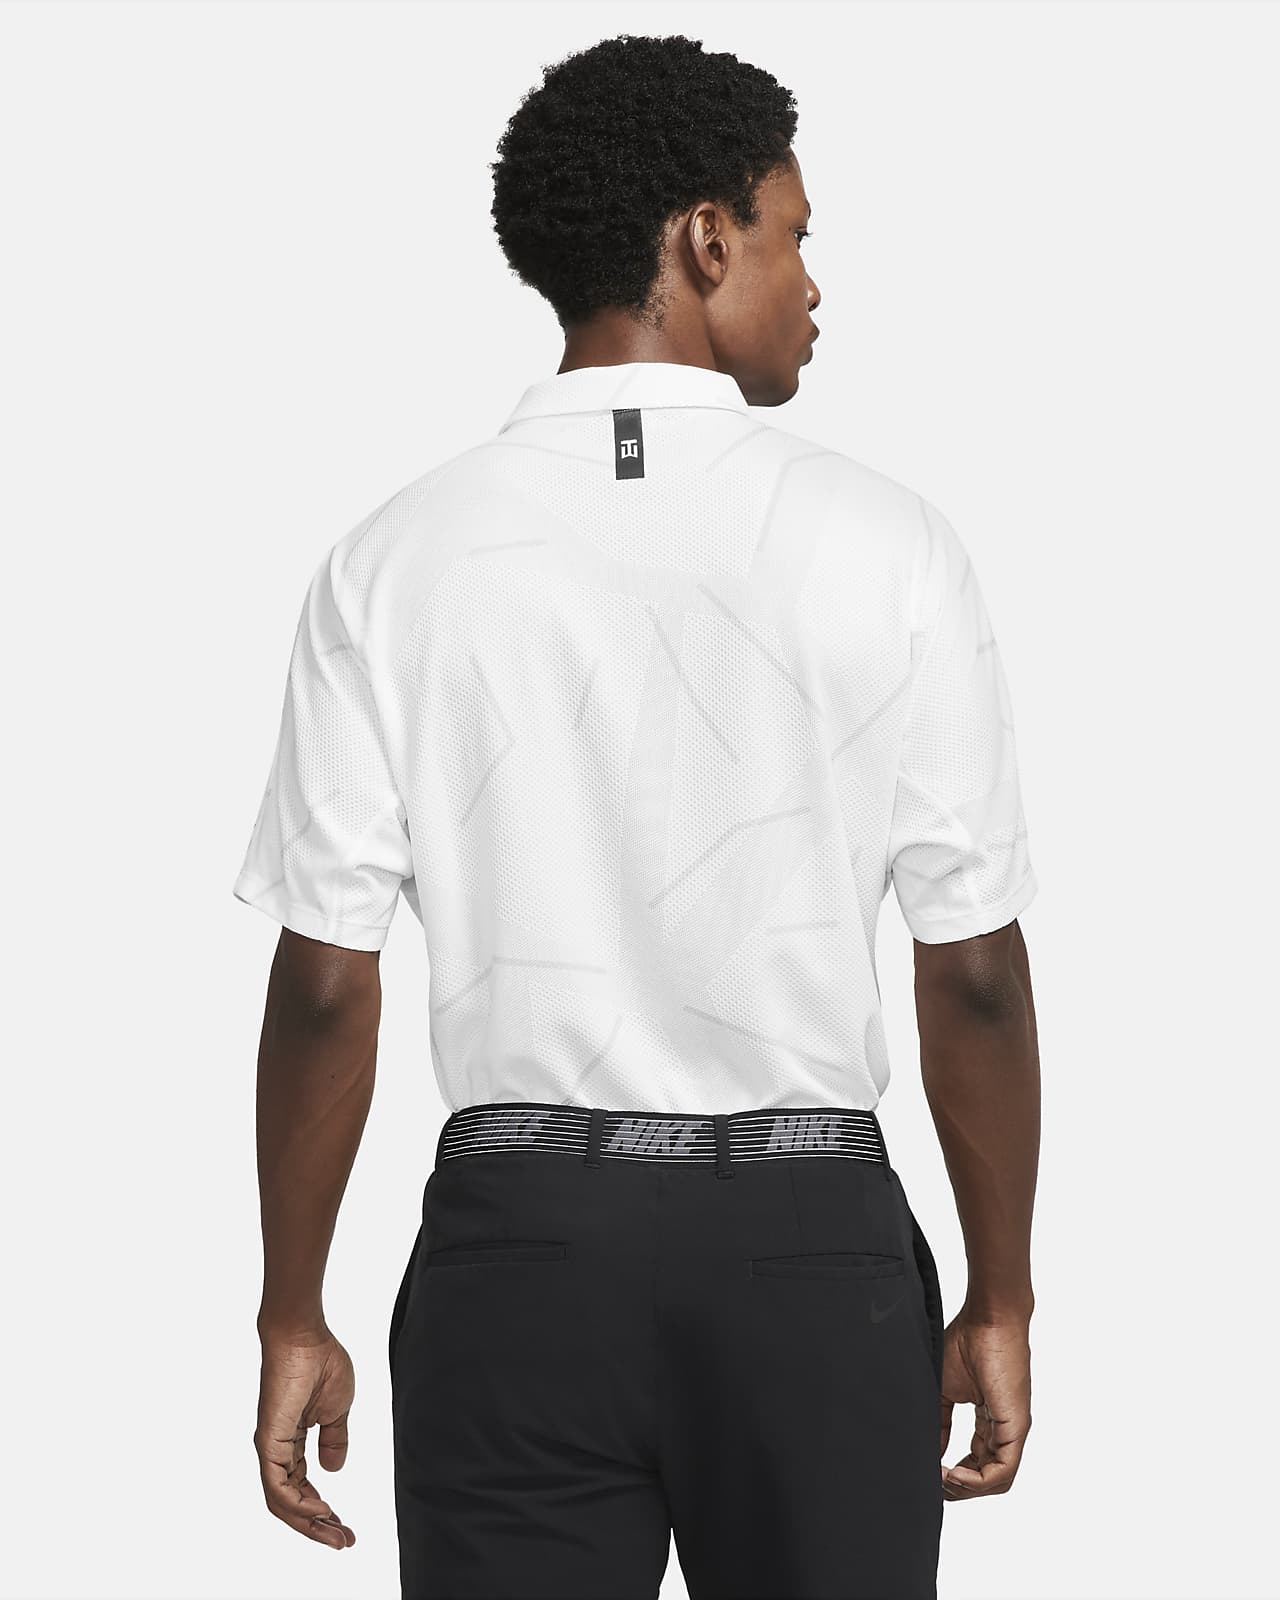 tiger woods golf trousers